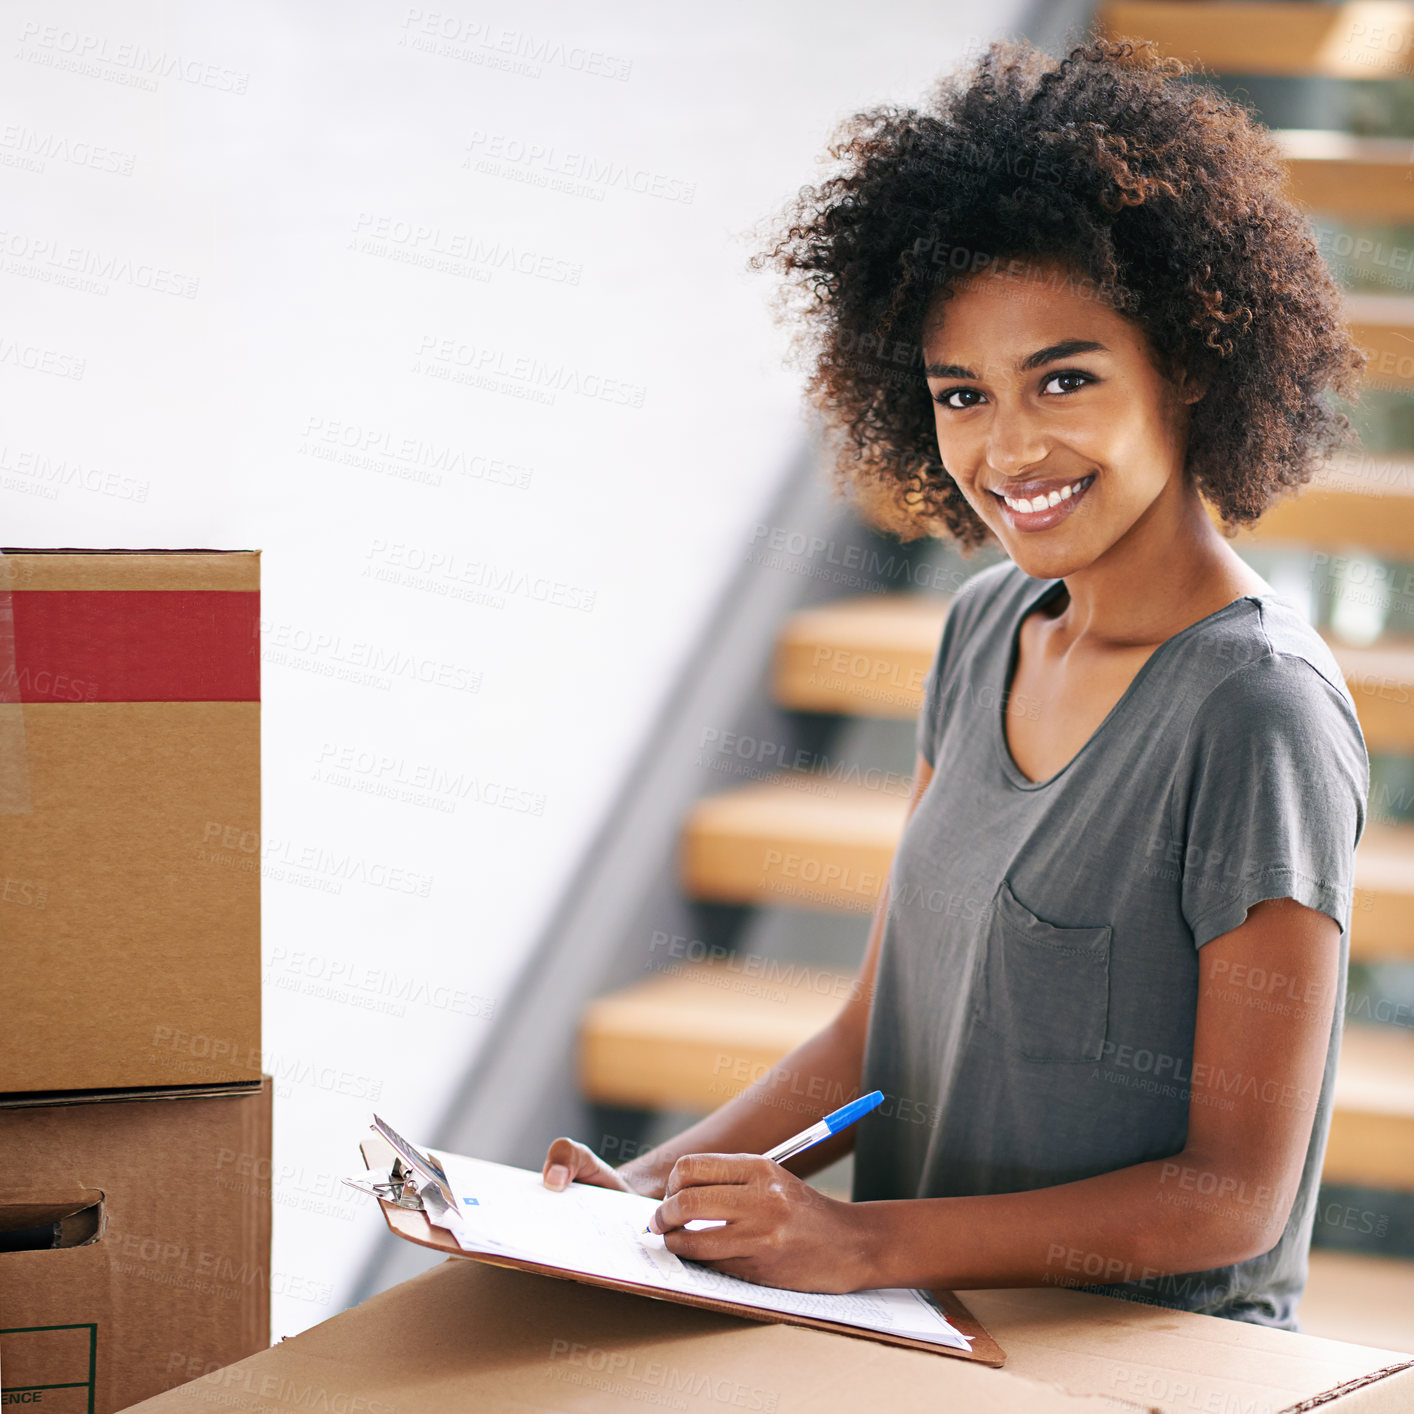 Buy stock photo Shot of a young woman checking her clipboard while busy packing up